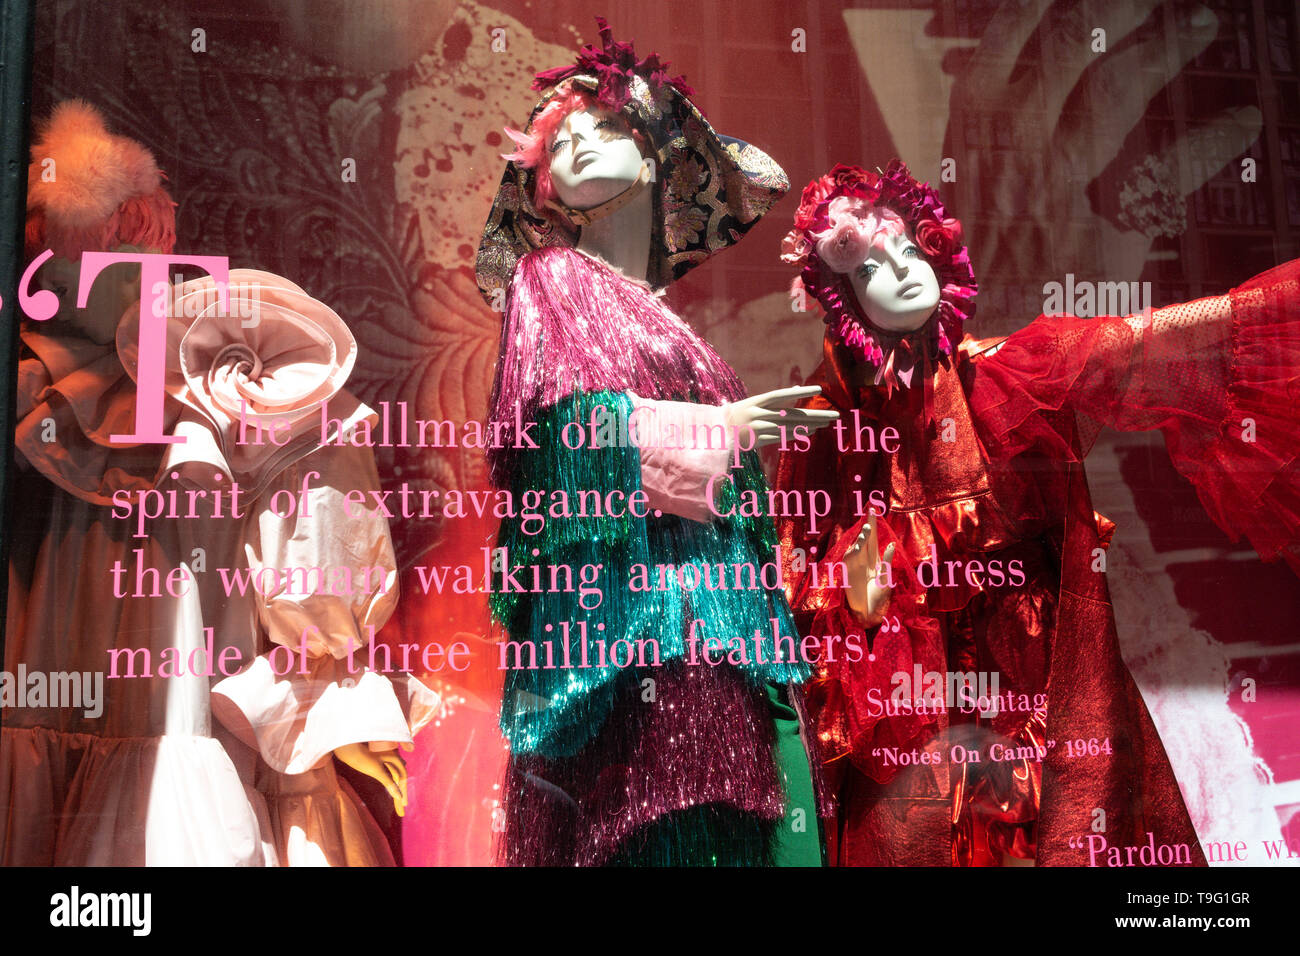 Bergdorf Goodman Department Store Windows coincide with The Metropolitan Museum of Art Costume Institute Exhibit 'Camp: Notes on Fashion', NYC, USA Stock Photo